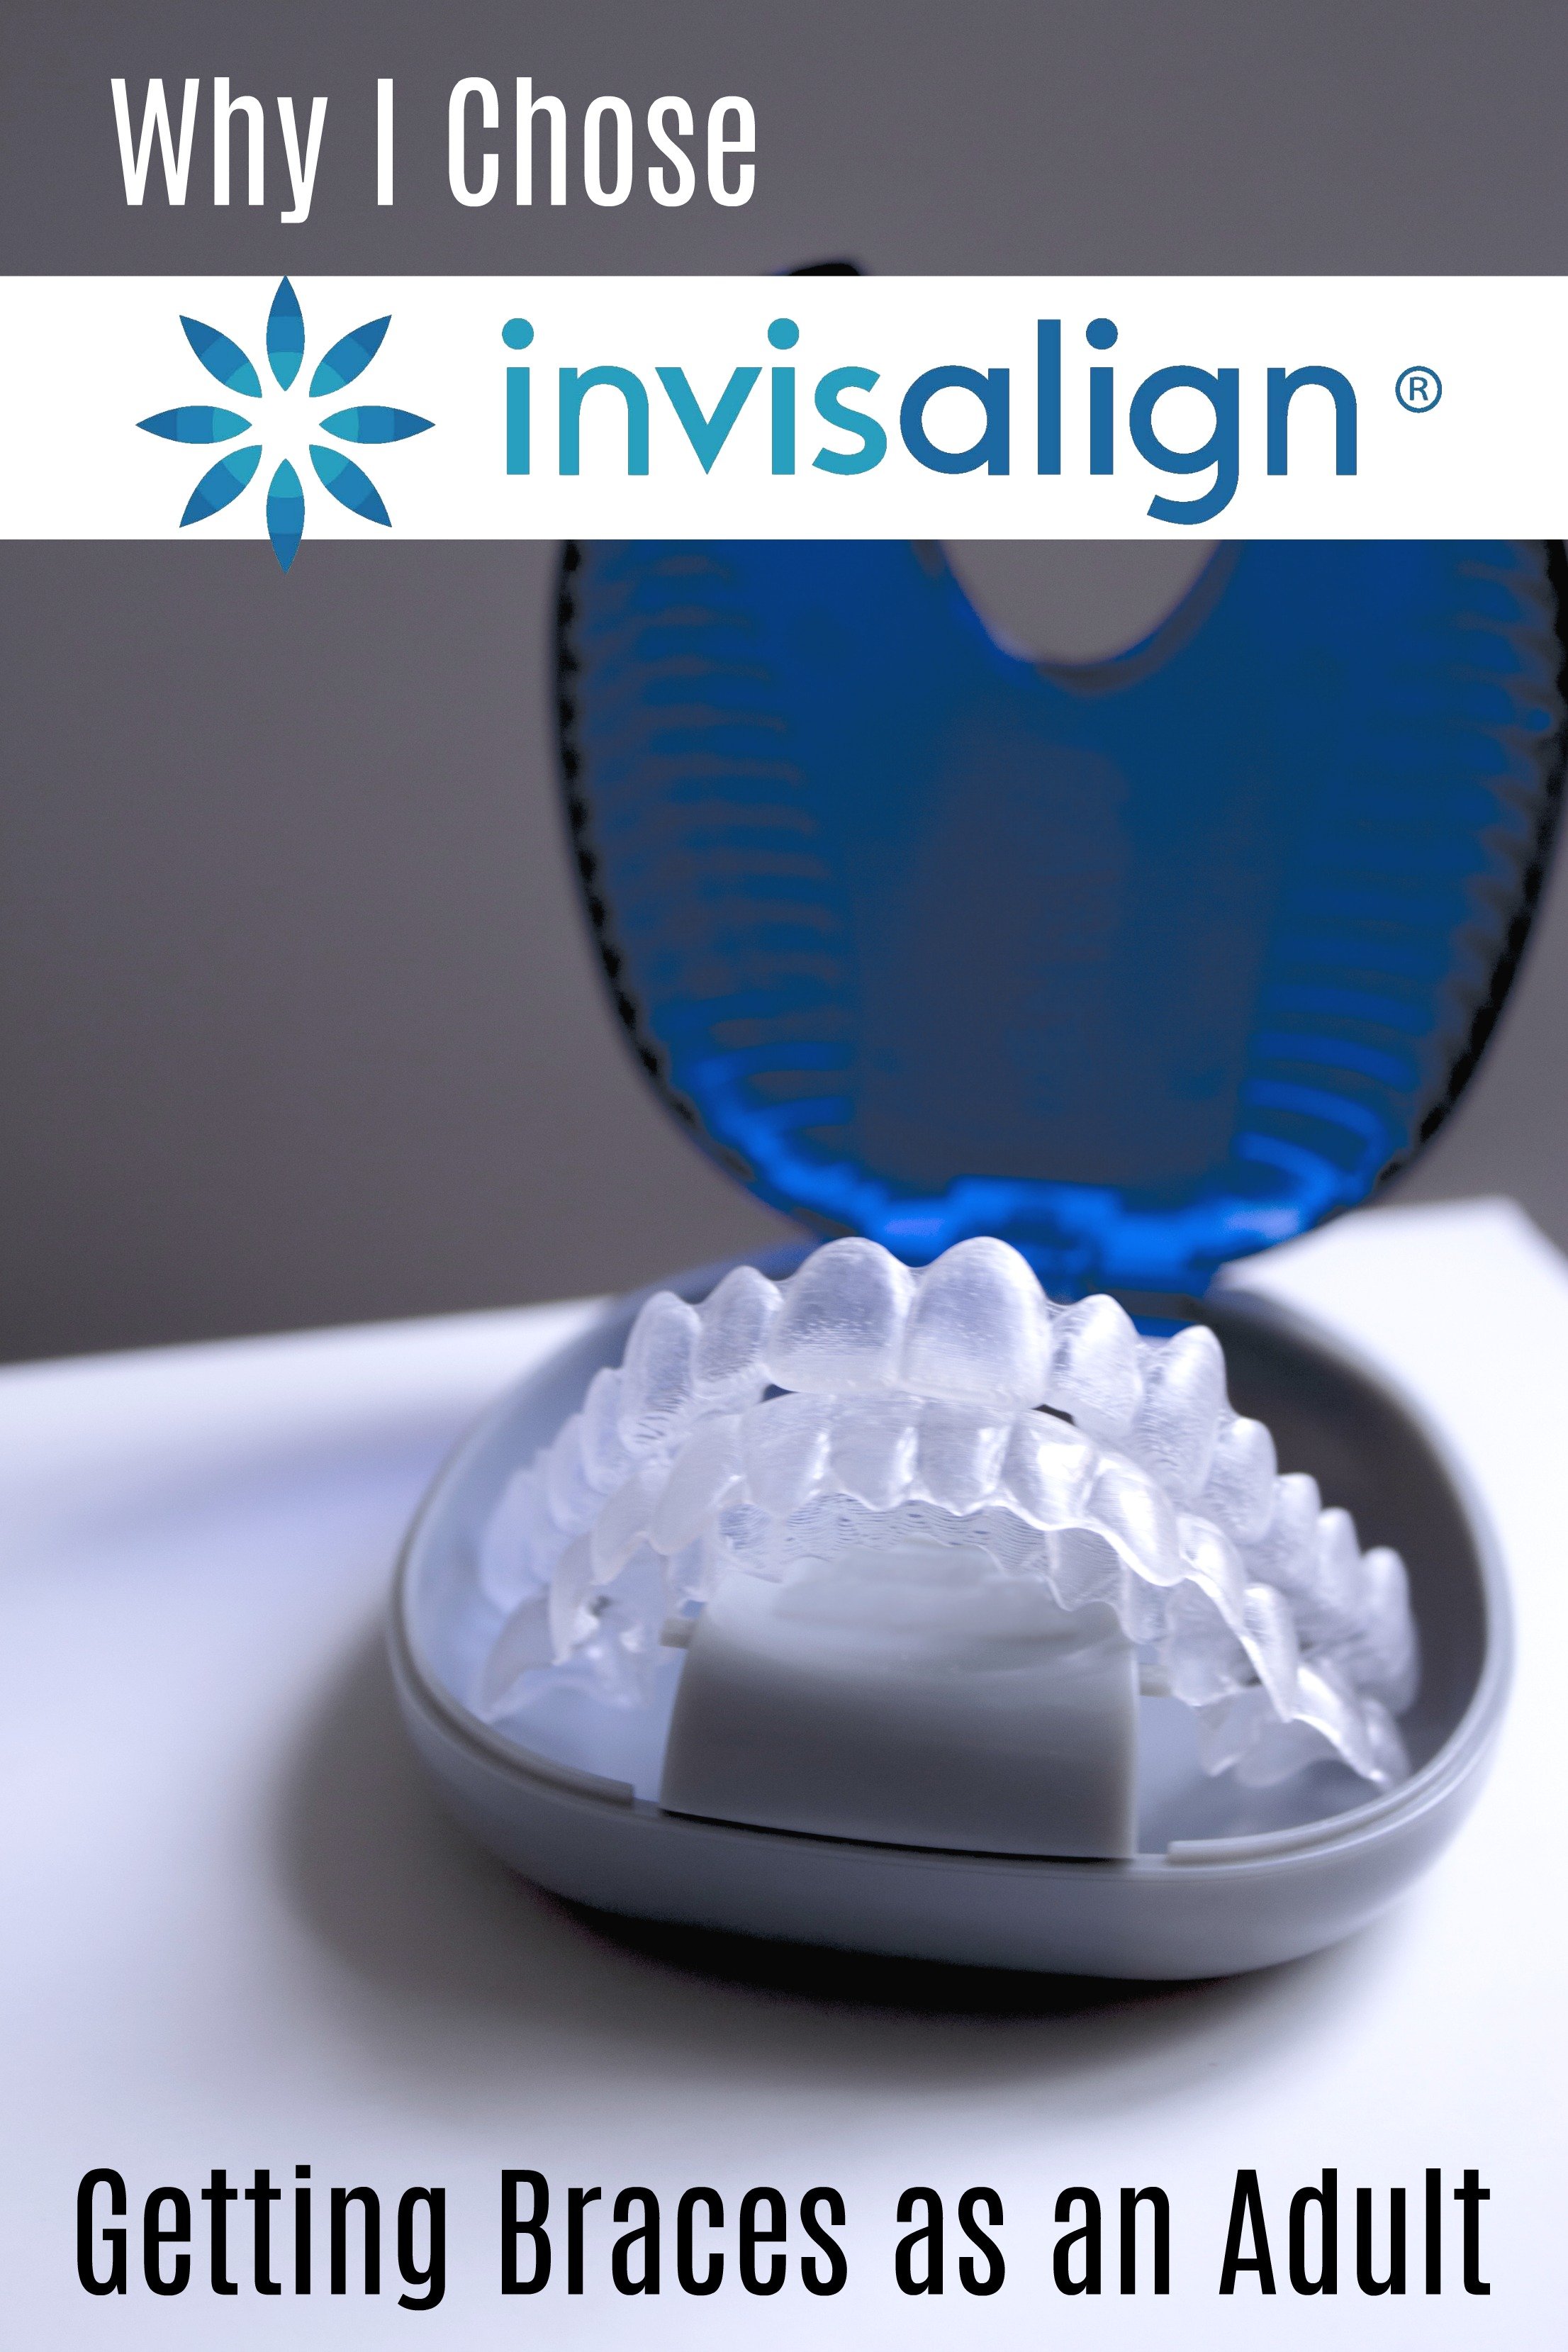 My Invisalign Experience (Getting Braces as an Adult)